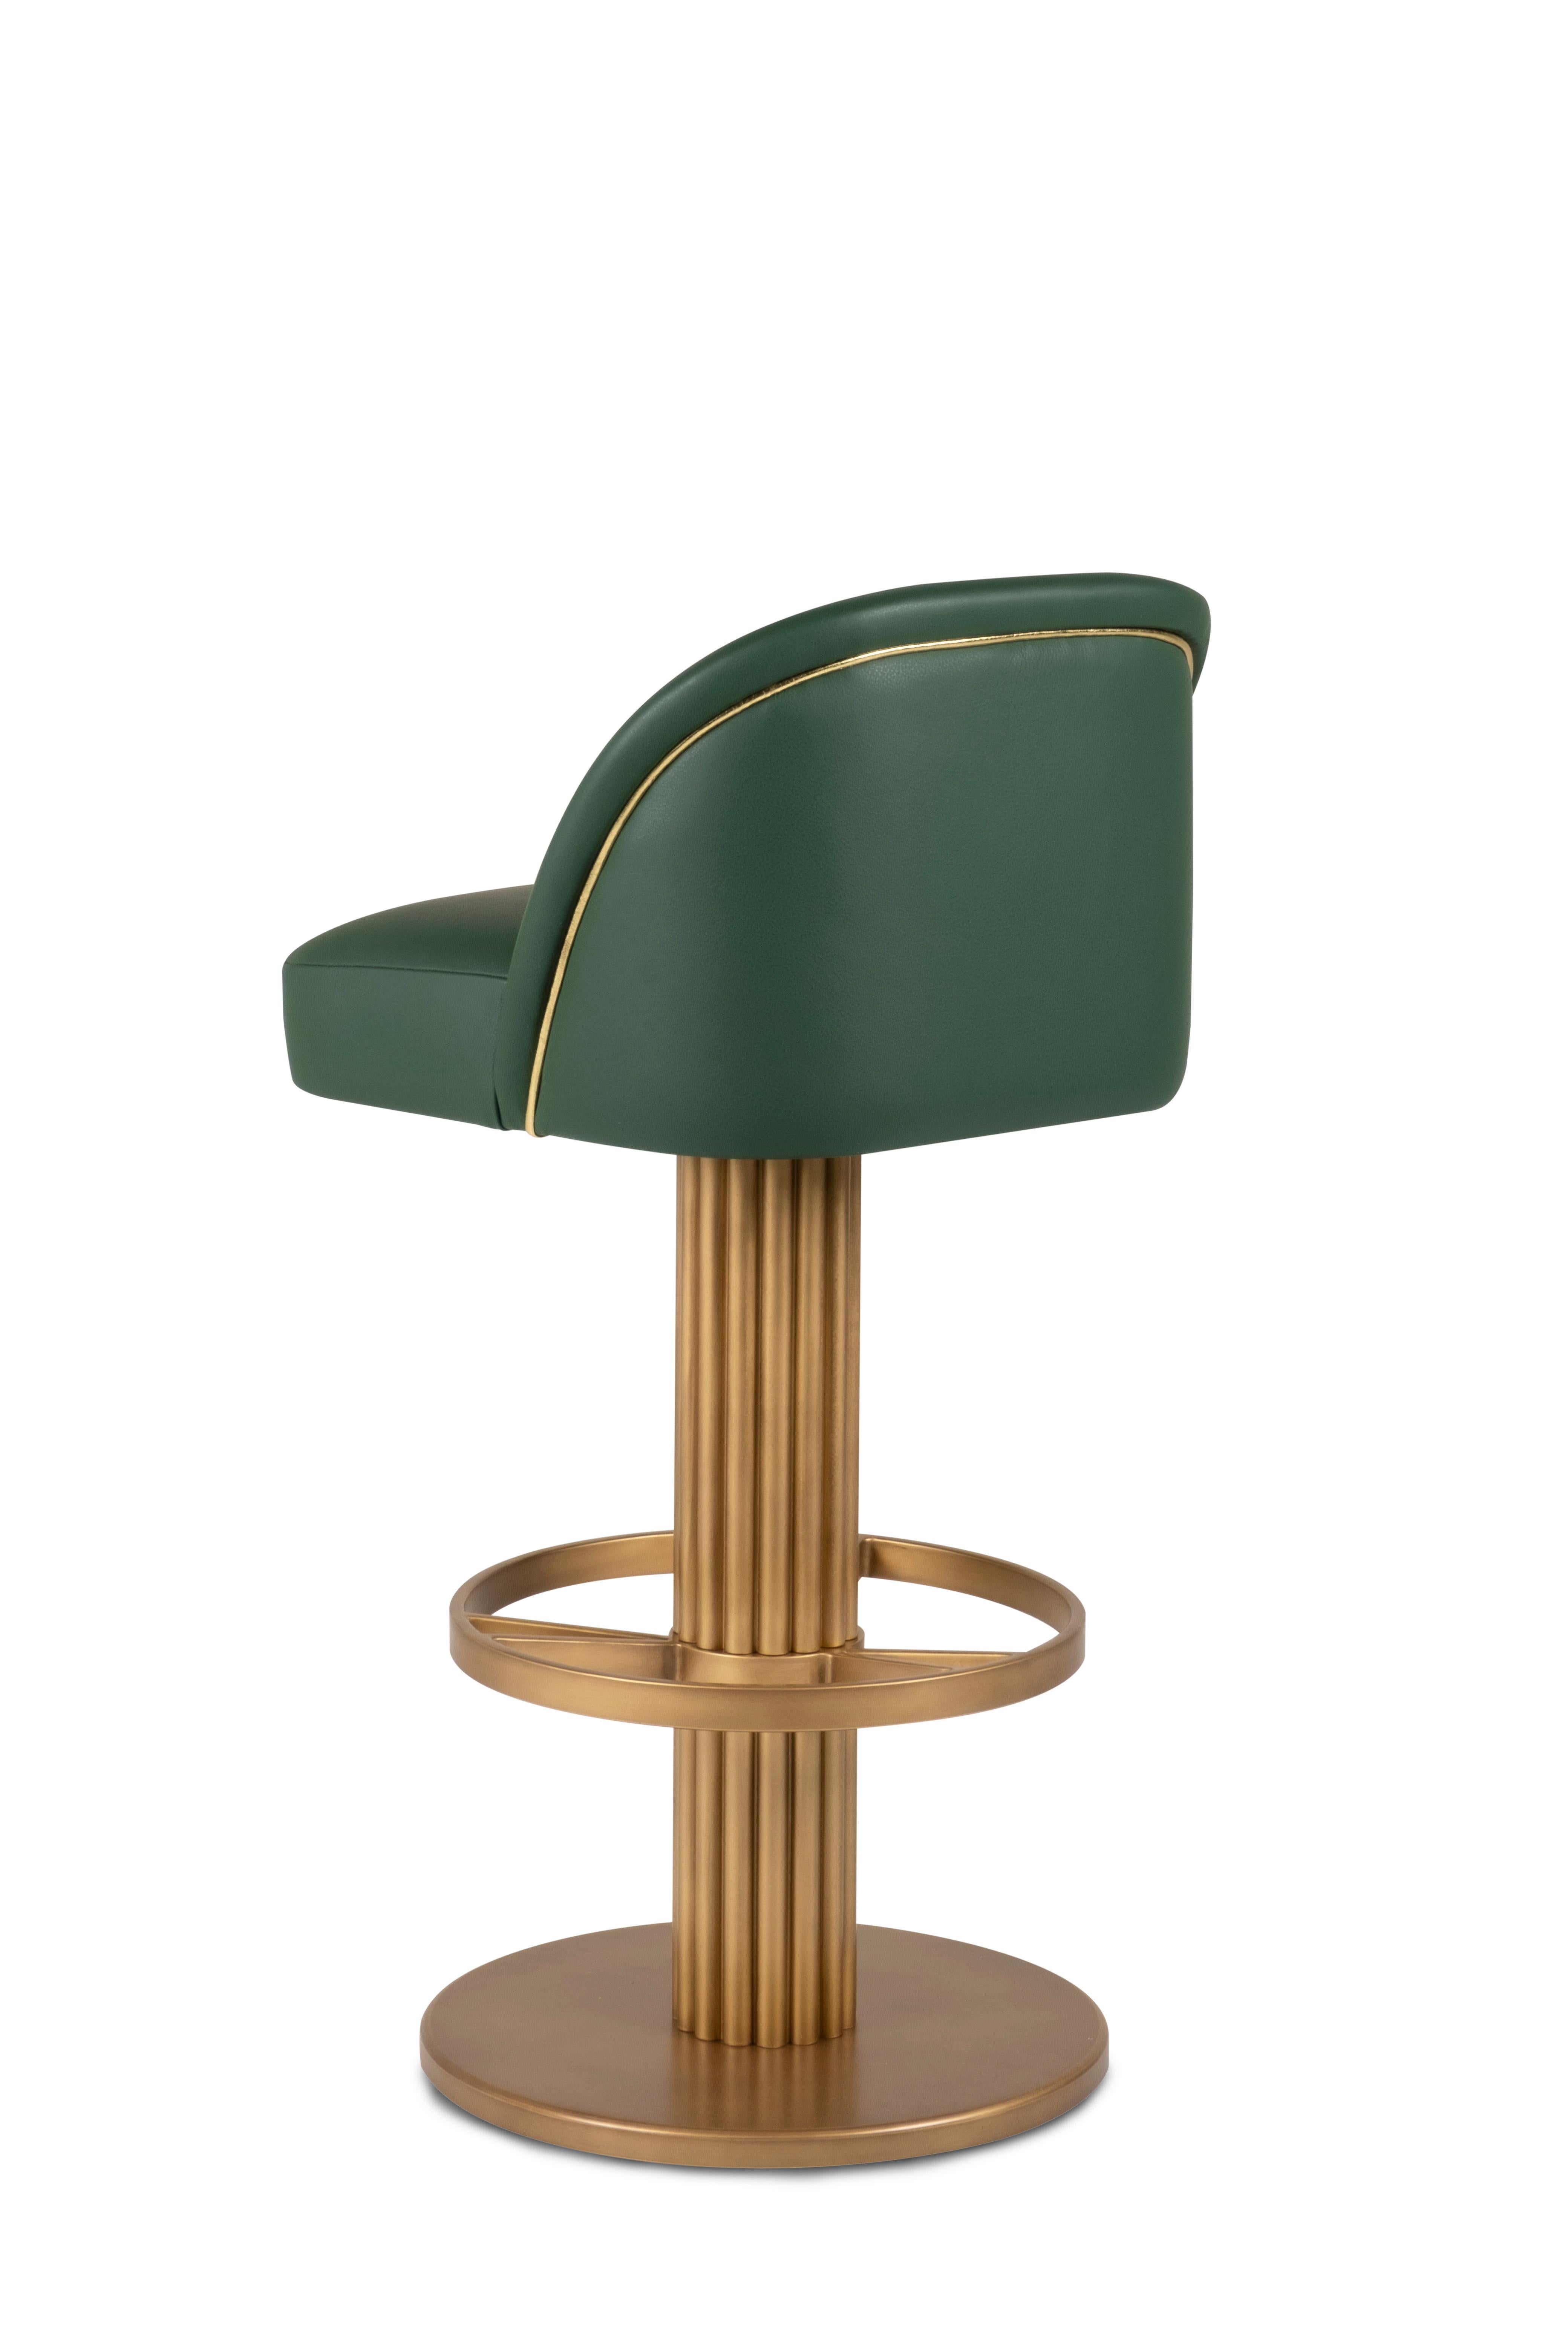 Art Deco Flute bar stool, Handcrafted in Portugal - Europe by Greenapple.

Flute bar stool embodies simplicity and comfort for relaxing moments, without forgetting that the small details make all the difference. Handcrafted with premium emerald